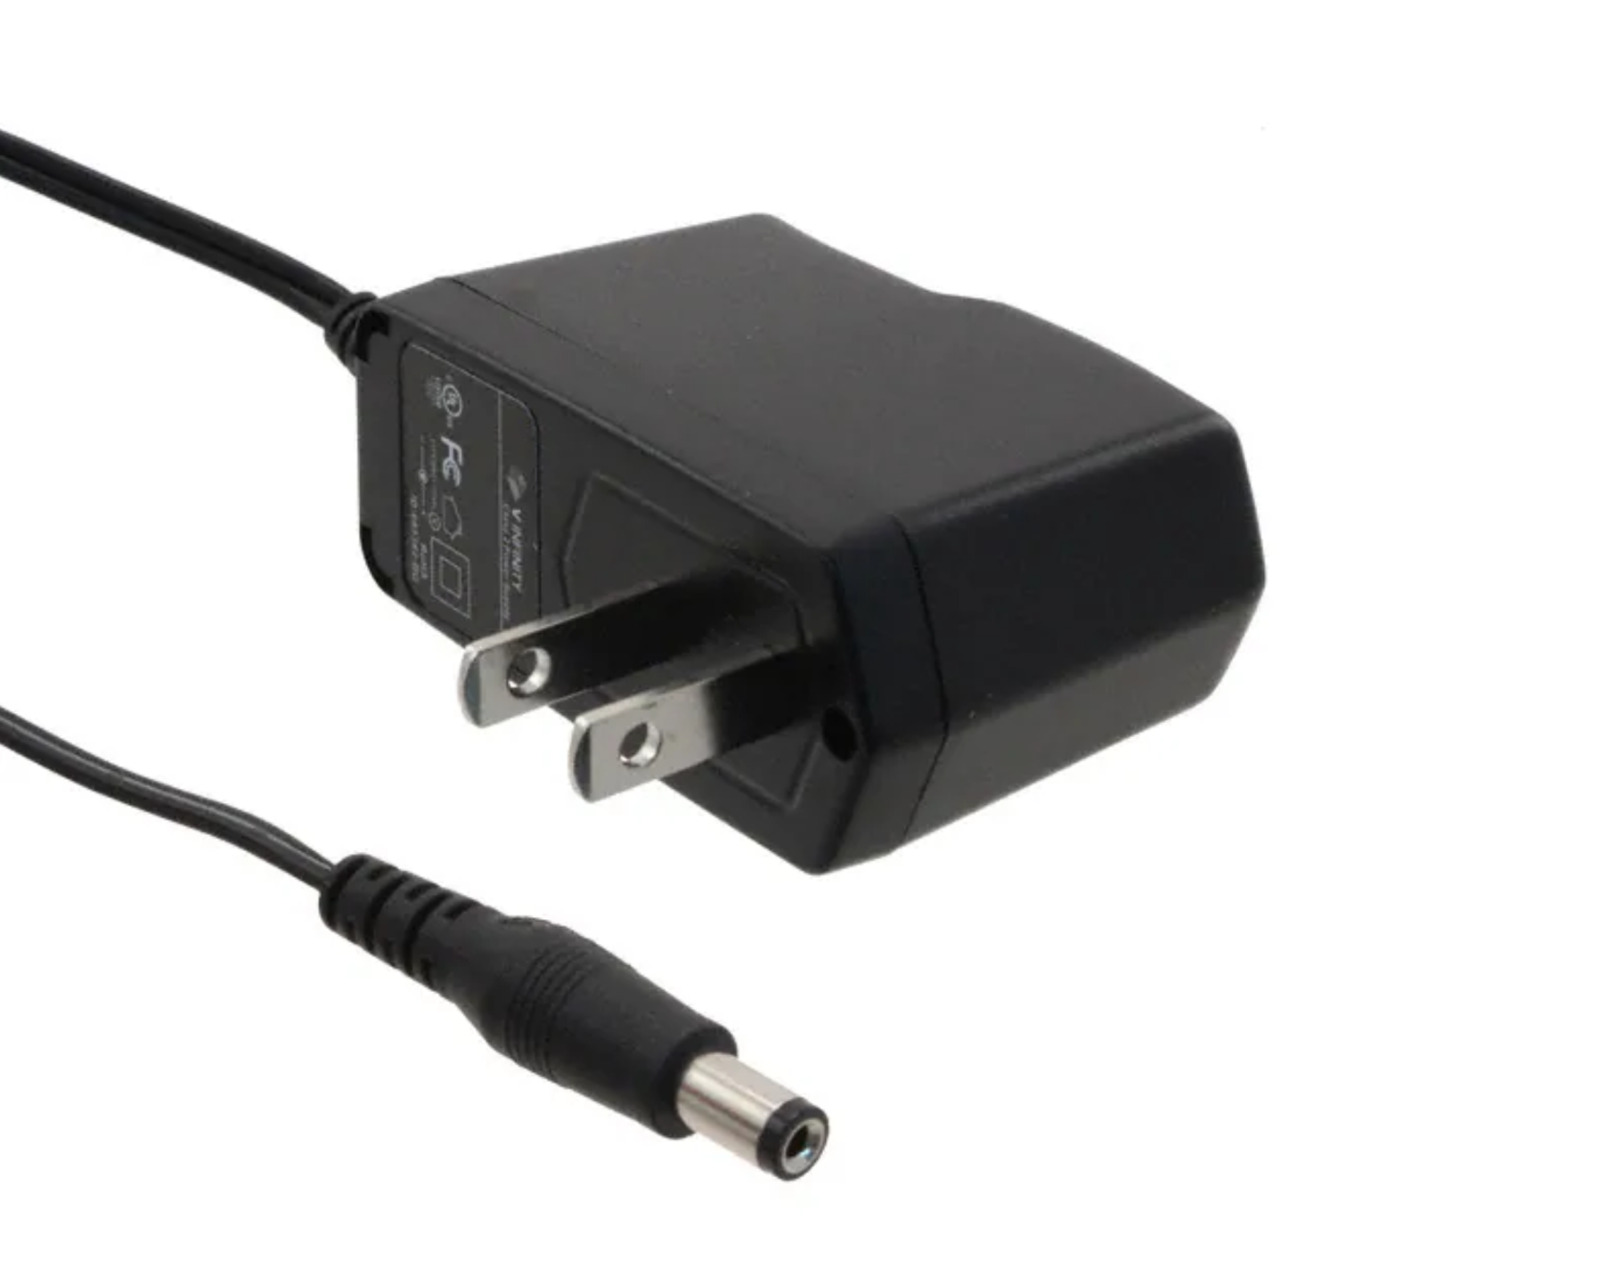 AC DC 5V 1A Adapter Charger P/N SDK-0302 Power Supply Cord Level V Efficiency